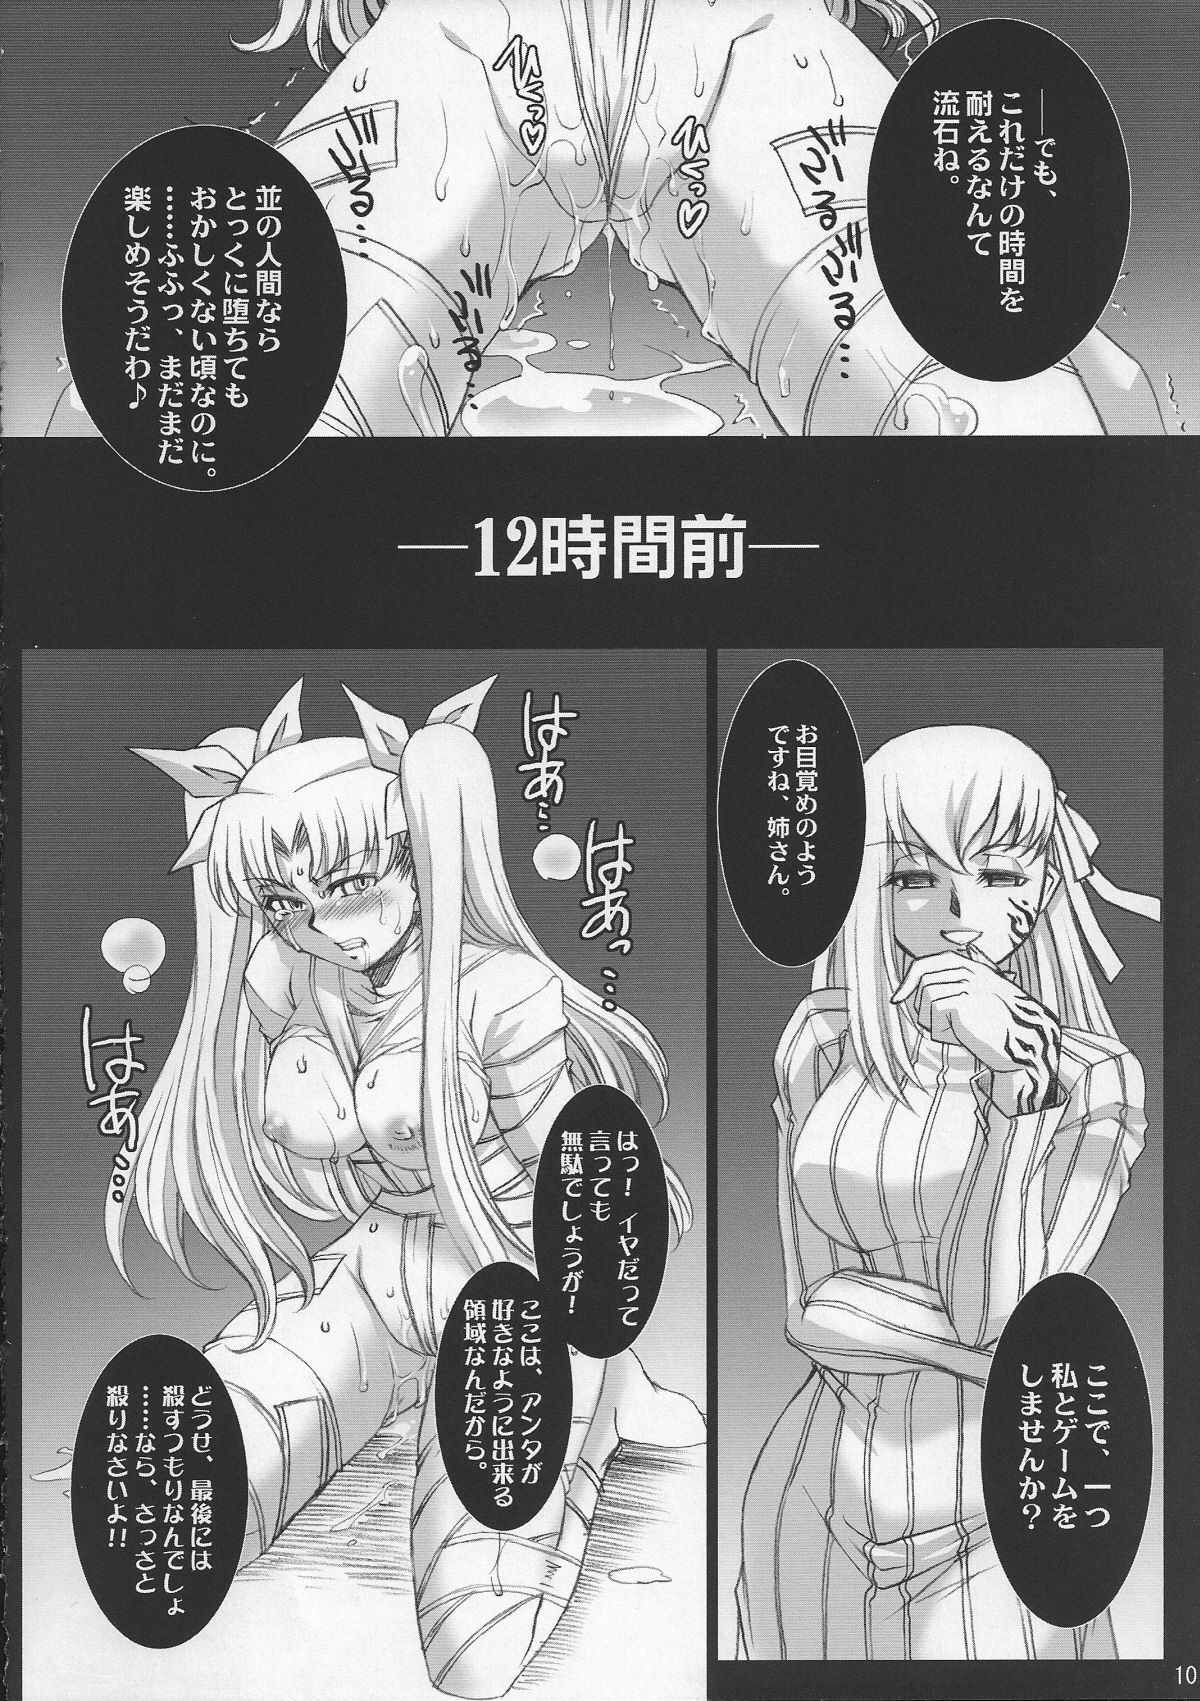 (COMIC1☆2) [H.B (B-RIVER)] Red Degeneration -DAY/3- (Fate/stay night) page 9 full